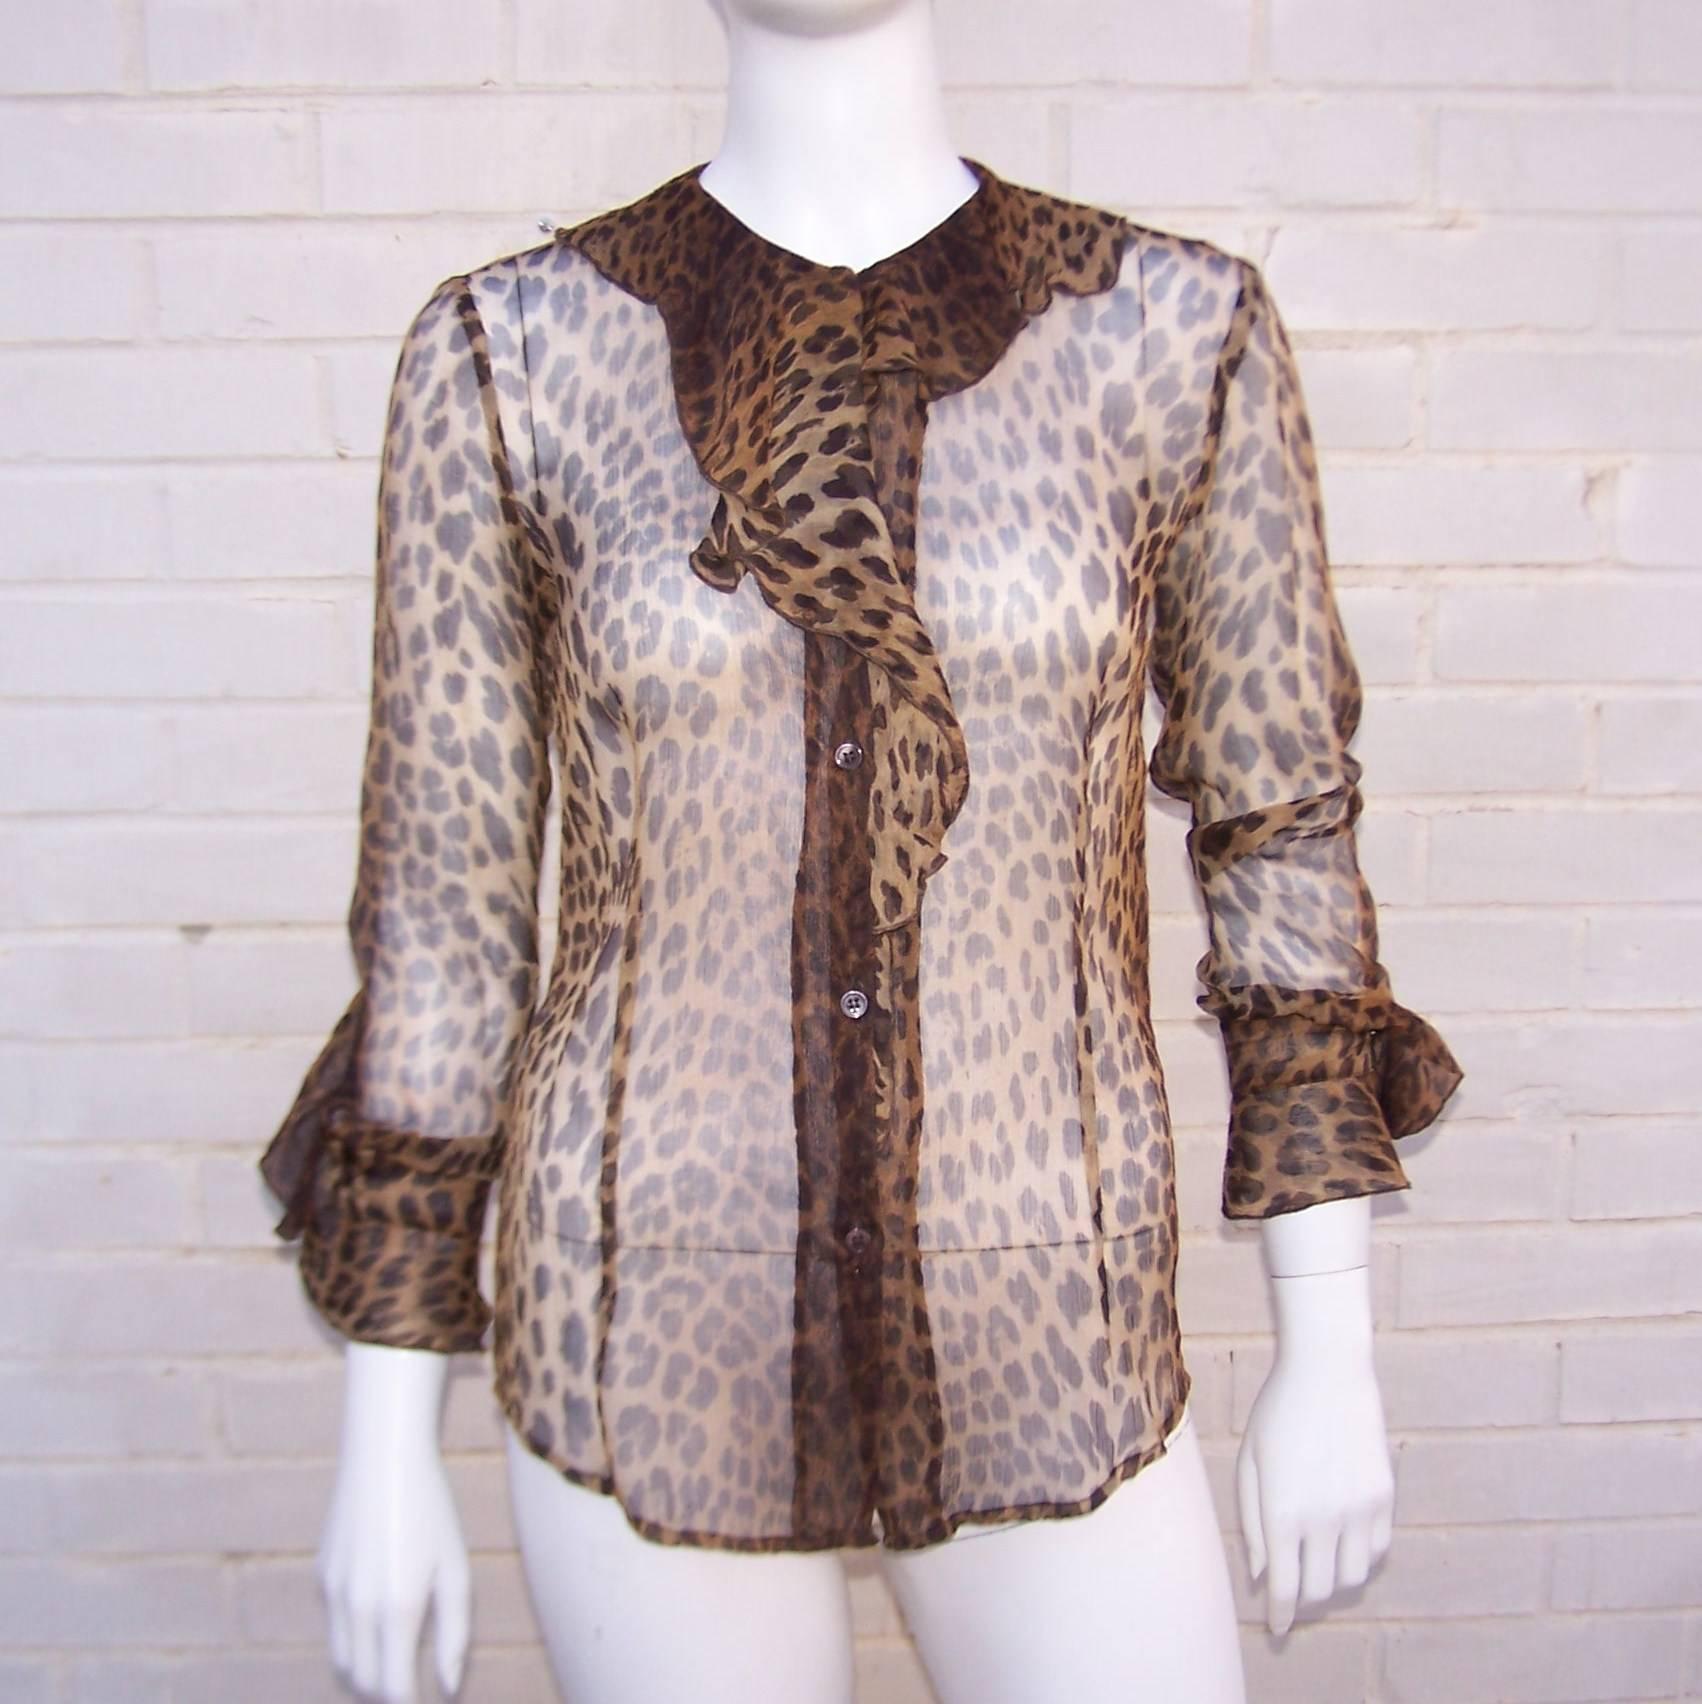 Purrrrrfect sheer leopard print top from the 'Love Moschino' jeans label.  It has an ultra feminine vibe with a flounce collar and cuffs though it is cut like a menswear shirt with front and back tails.  It buttons up the front with a jabot neckline